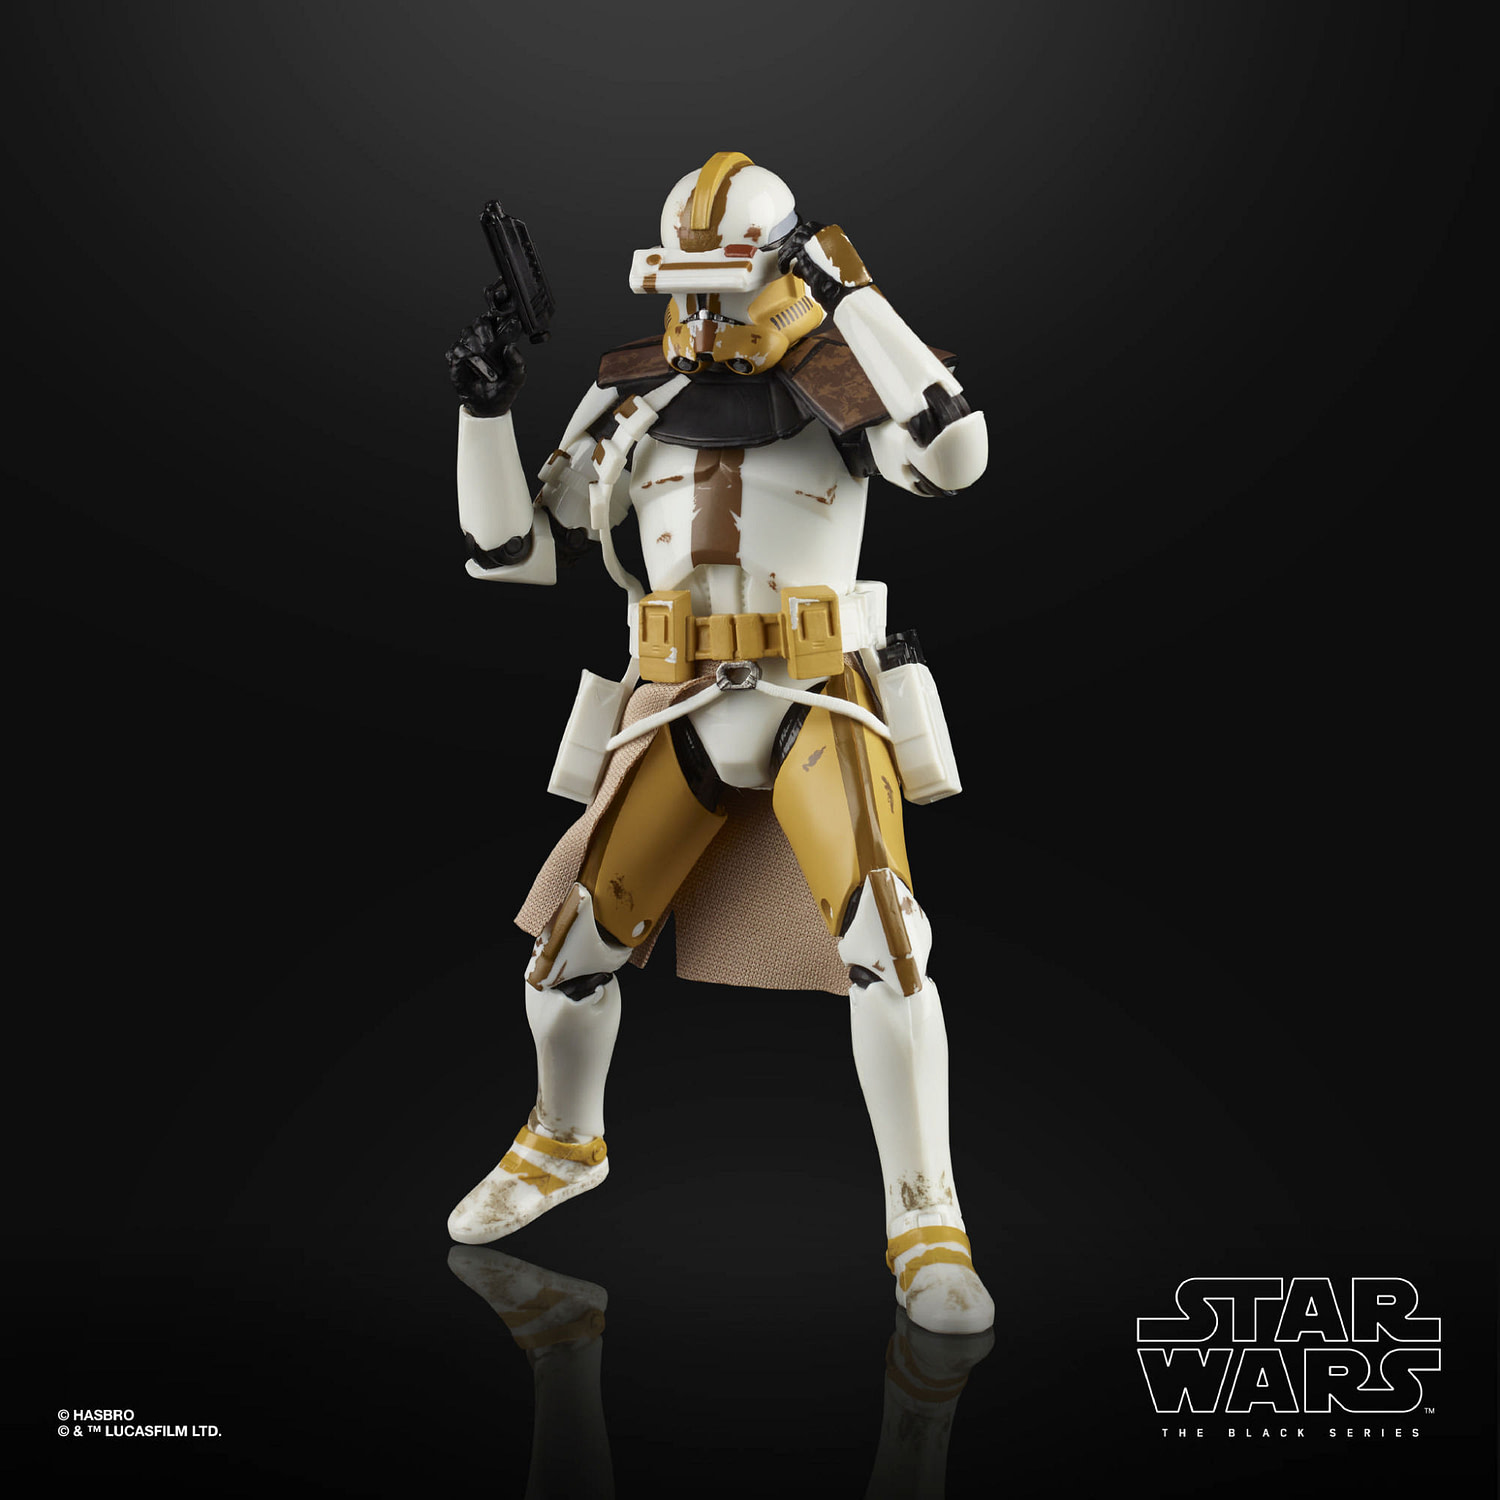 Star Wars Black Series 6/" Action Figure new,but without box clone trooper A60H